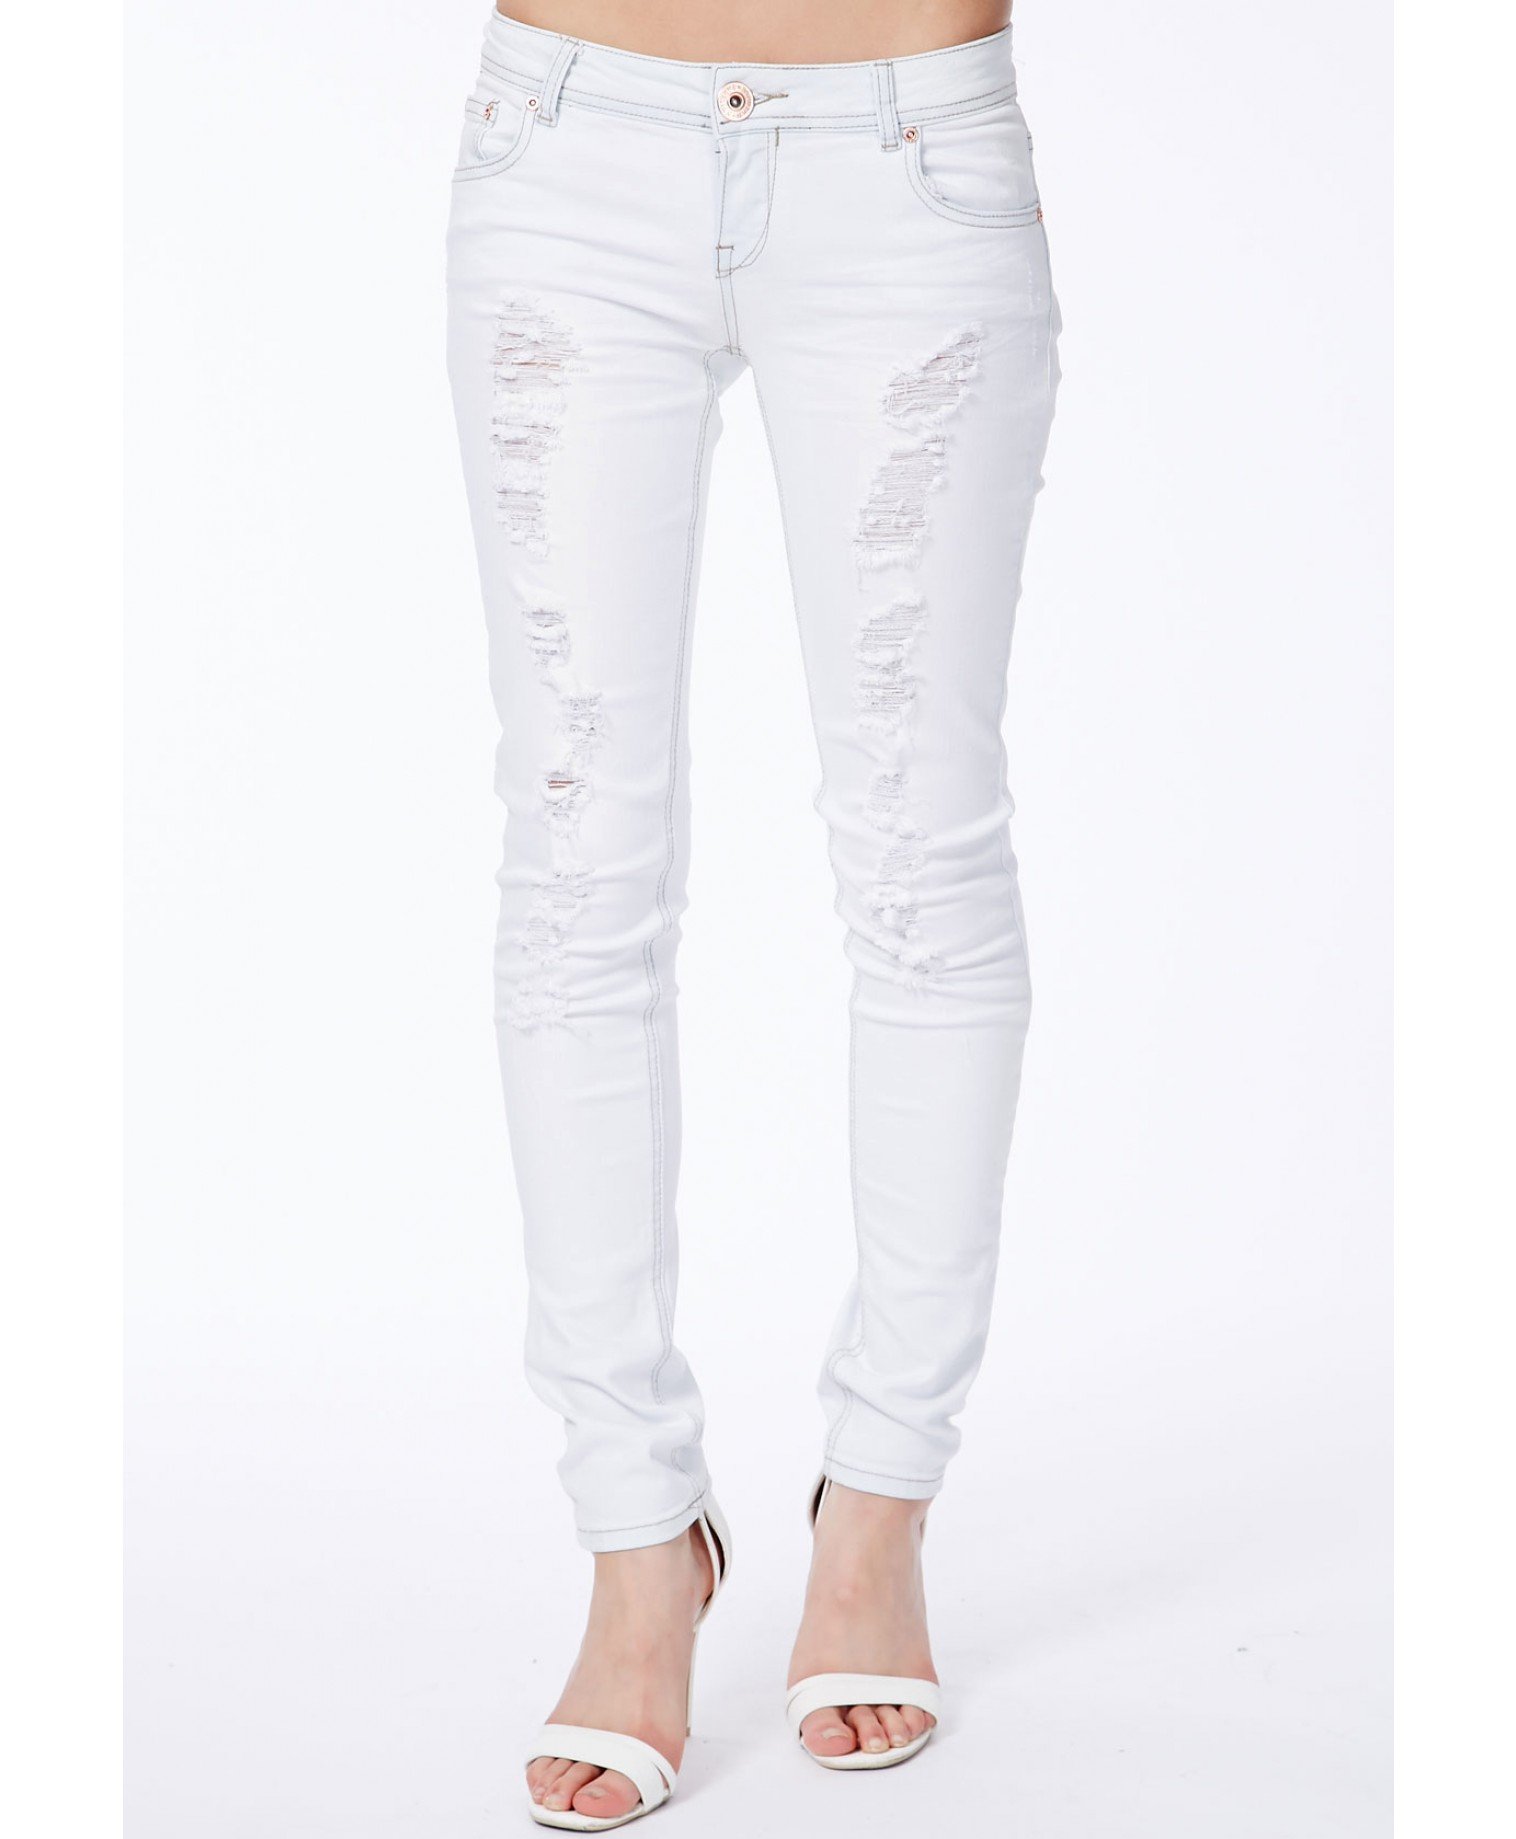 Missguided Nataliya Ripped Skinny Jeans In Light Blue in Blue | Lyst